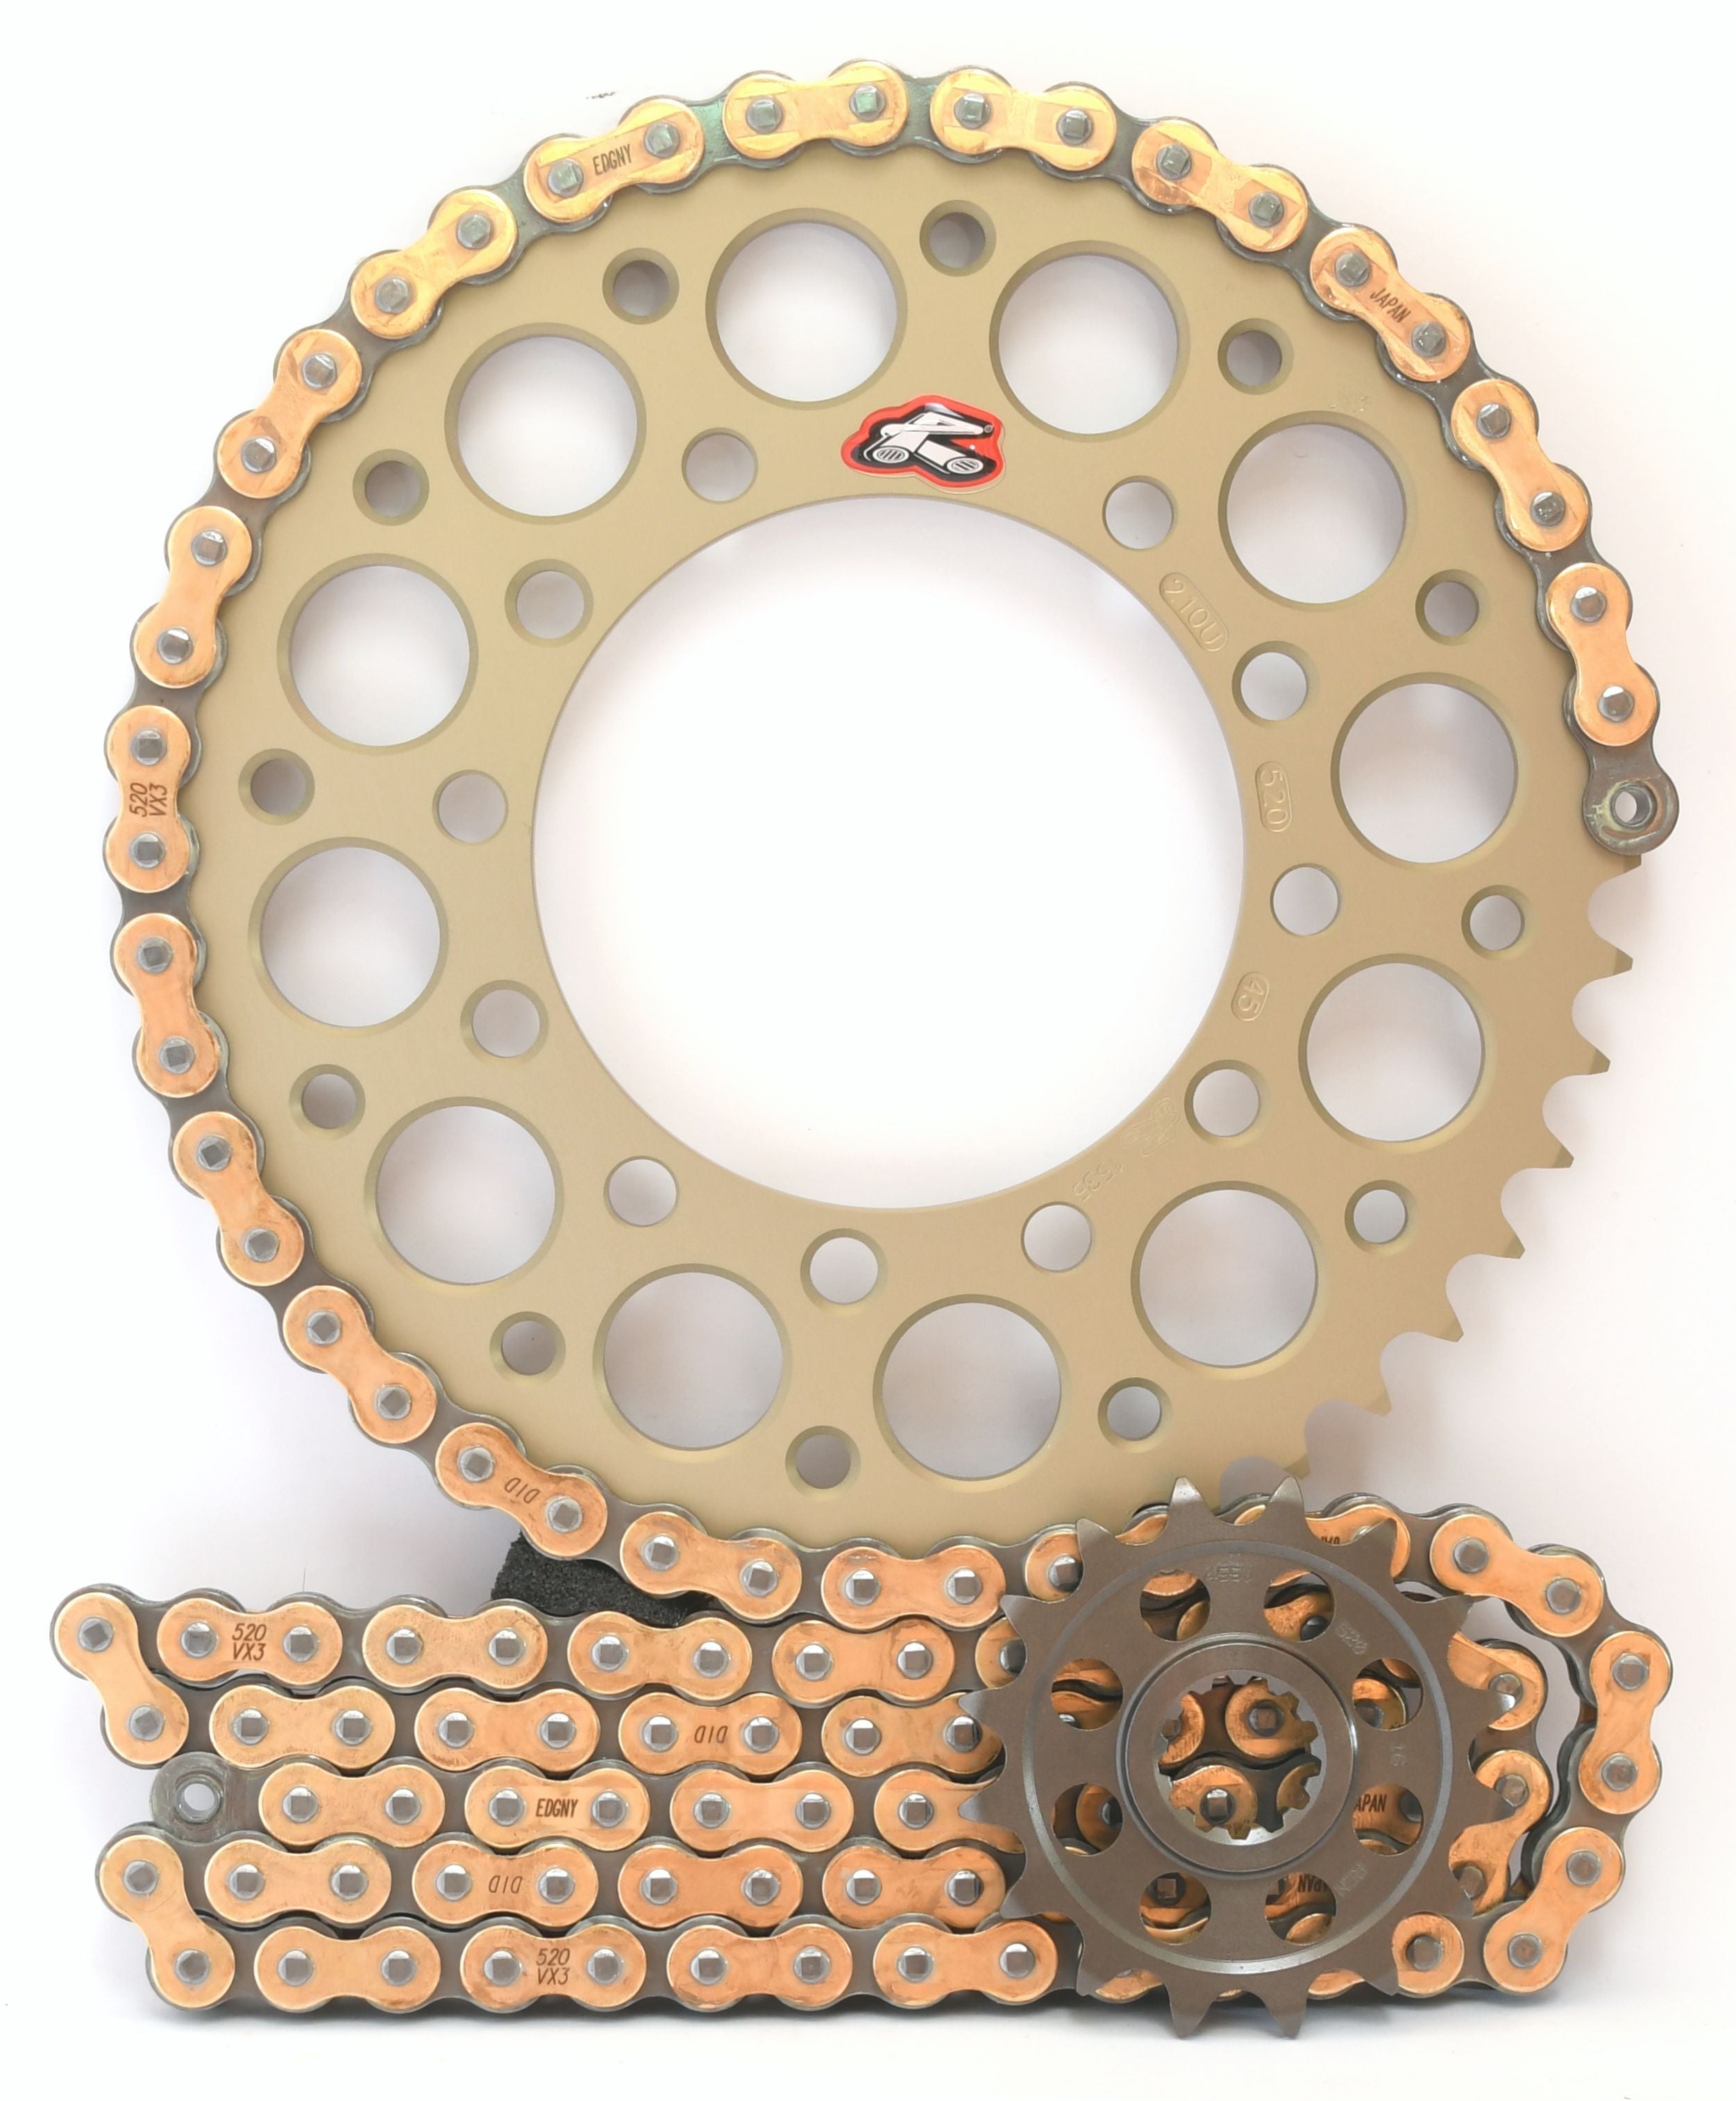 Renthal Ultralight and DID 520 Conversion Chain & Sprocket Kit for Kawasaki ZX10R 2004-2005 - Standard Gearing